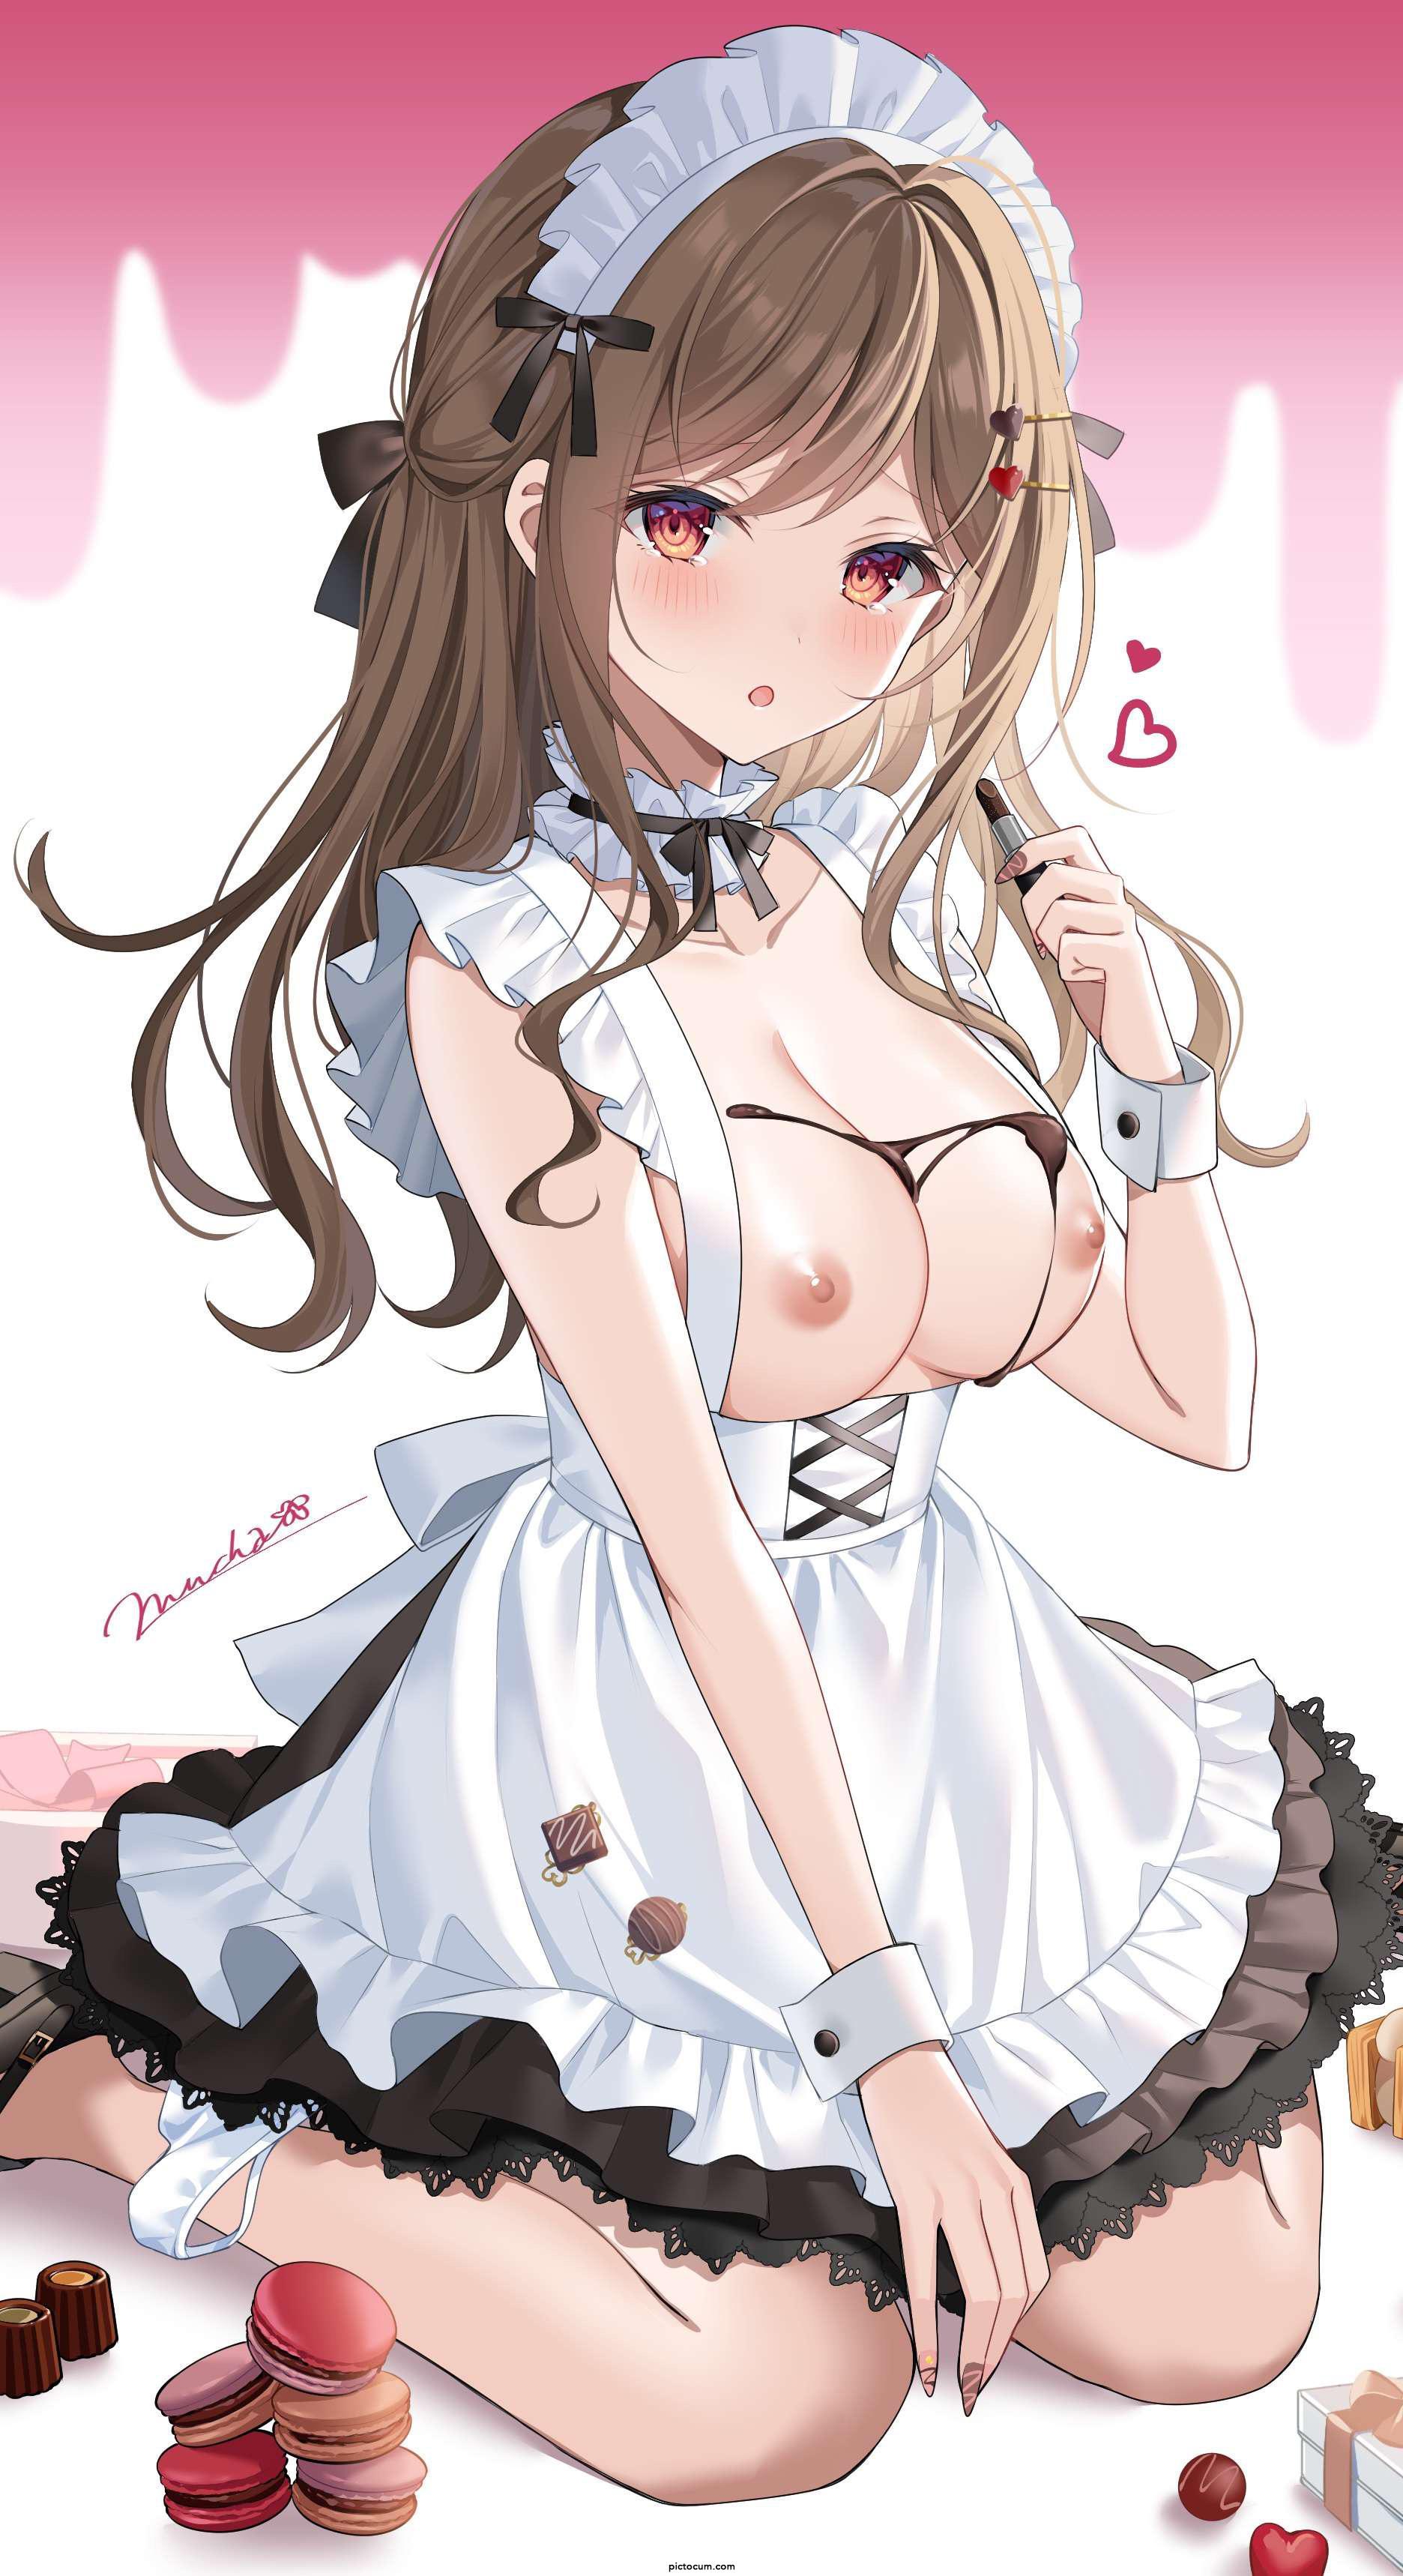 Maid girl made a chocolate mess on her tits